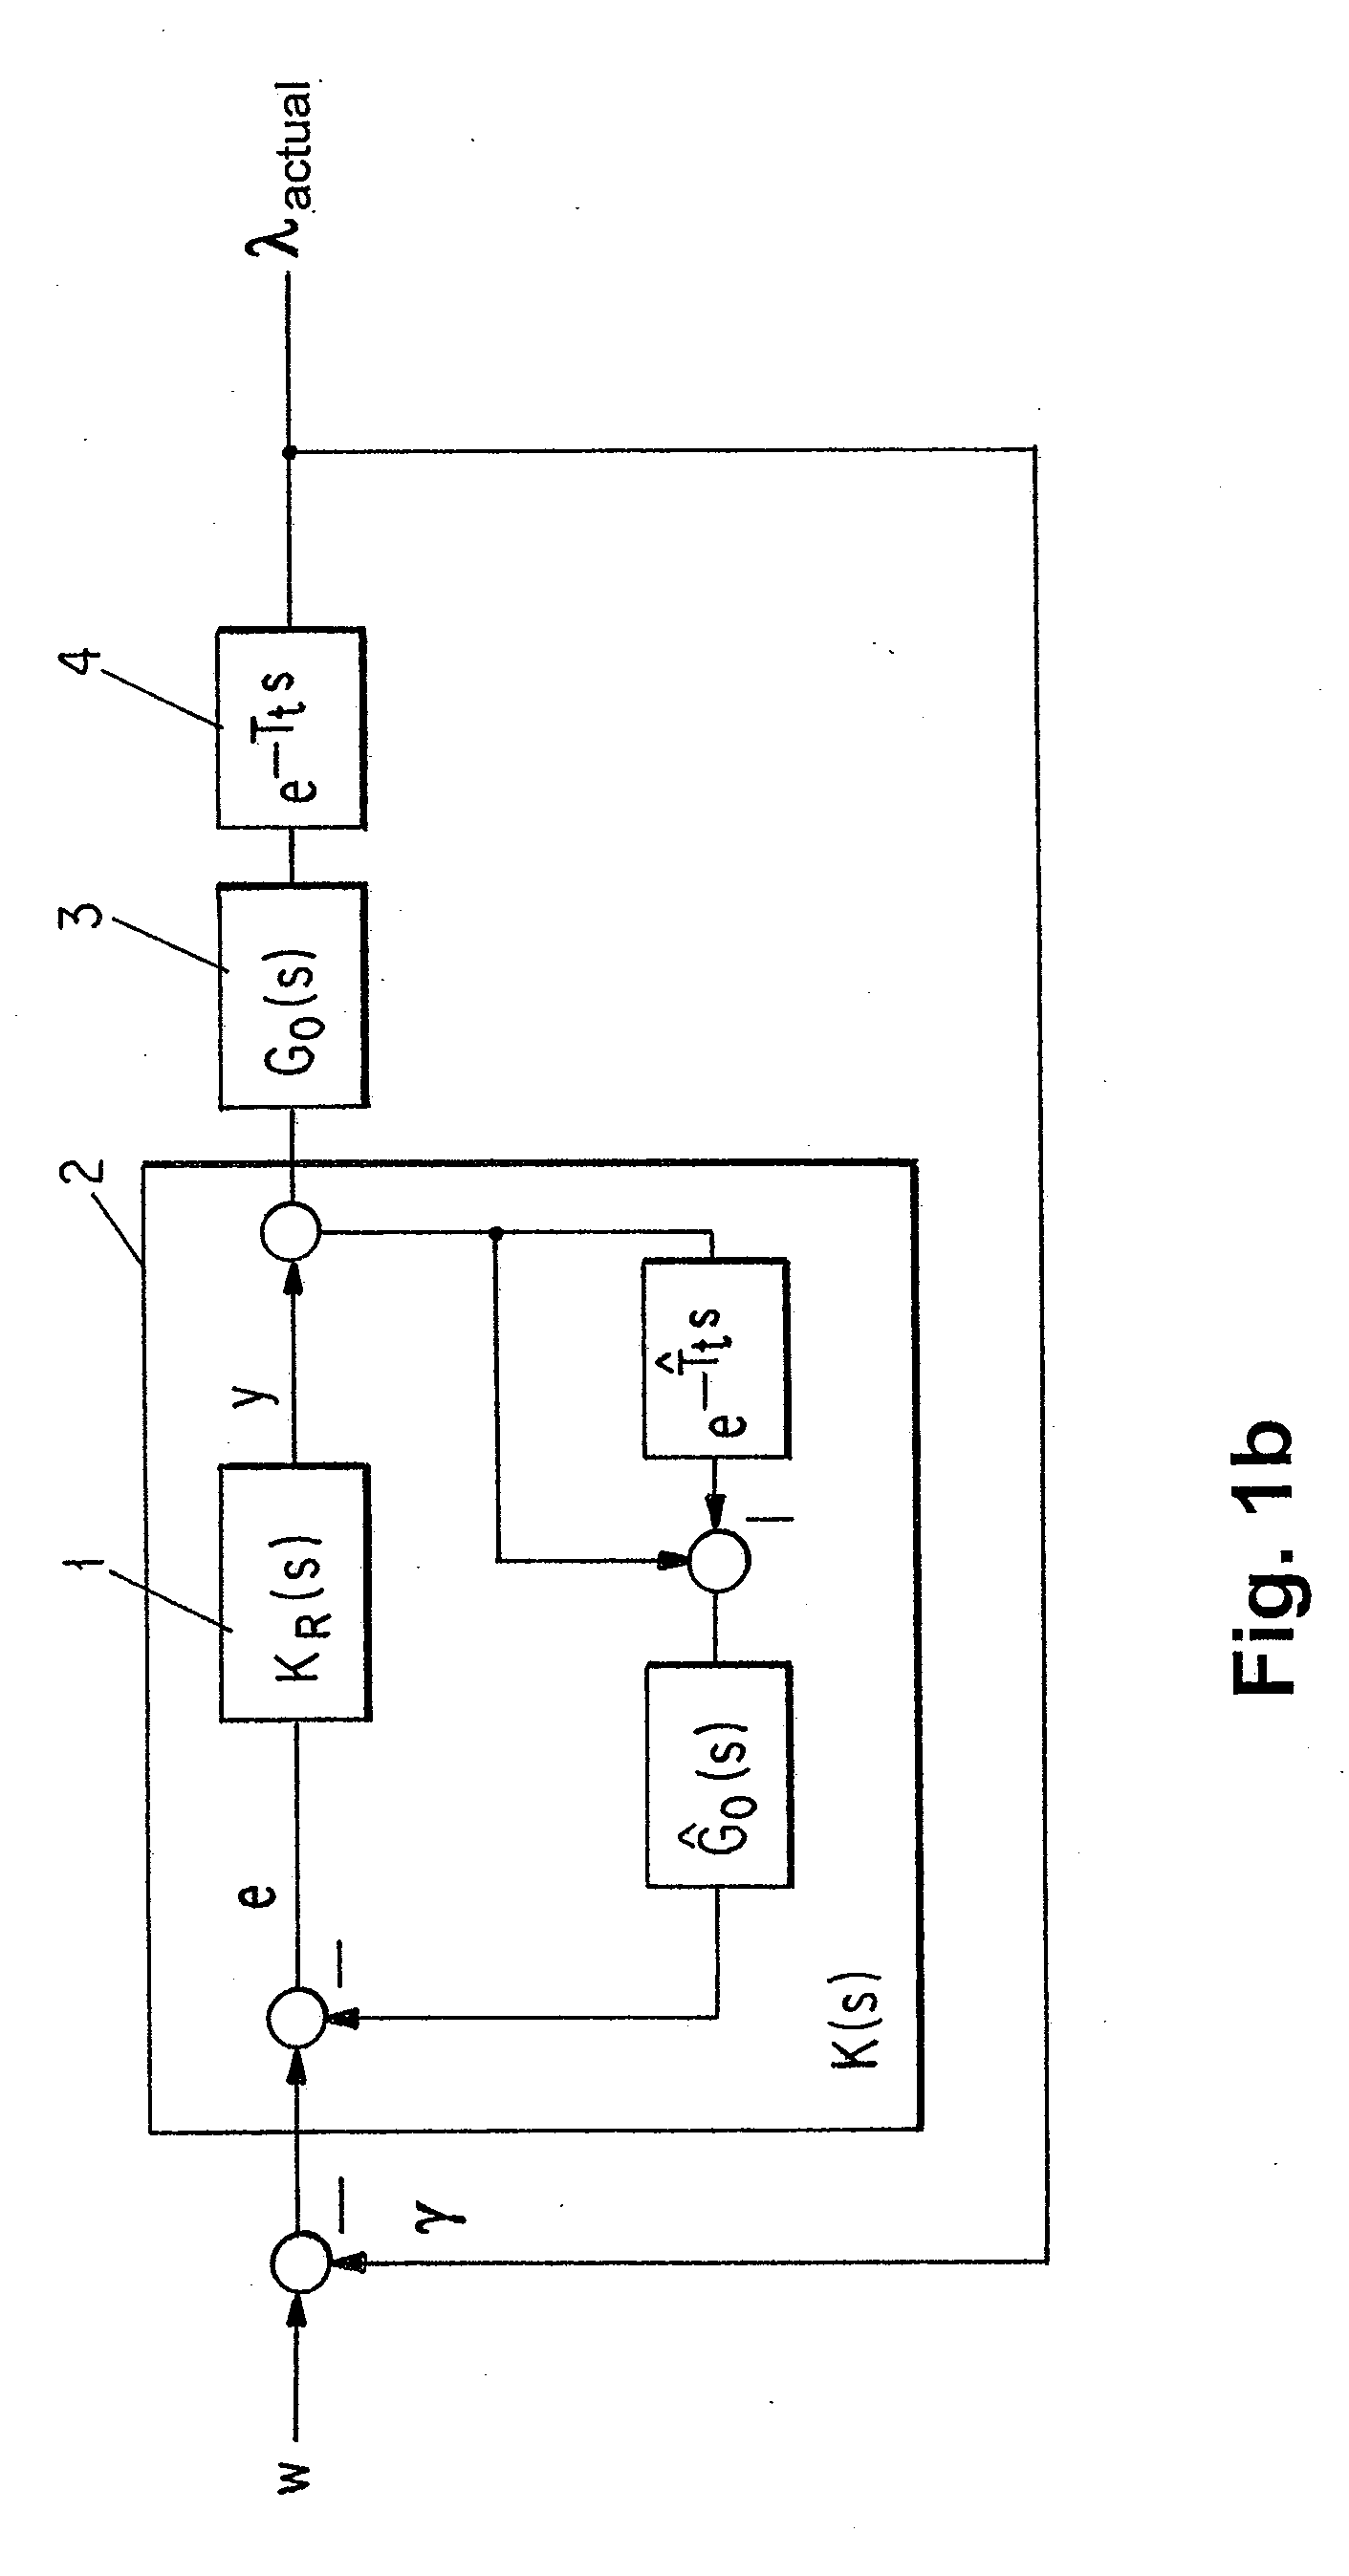 Method for Regulating an Air-Fuel Mixture For An Internal-Combustion Engine